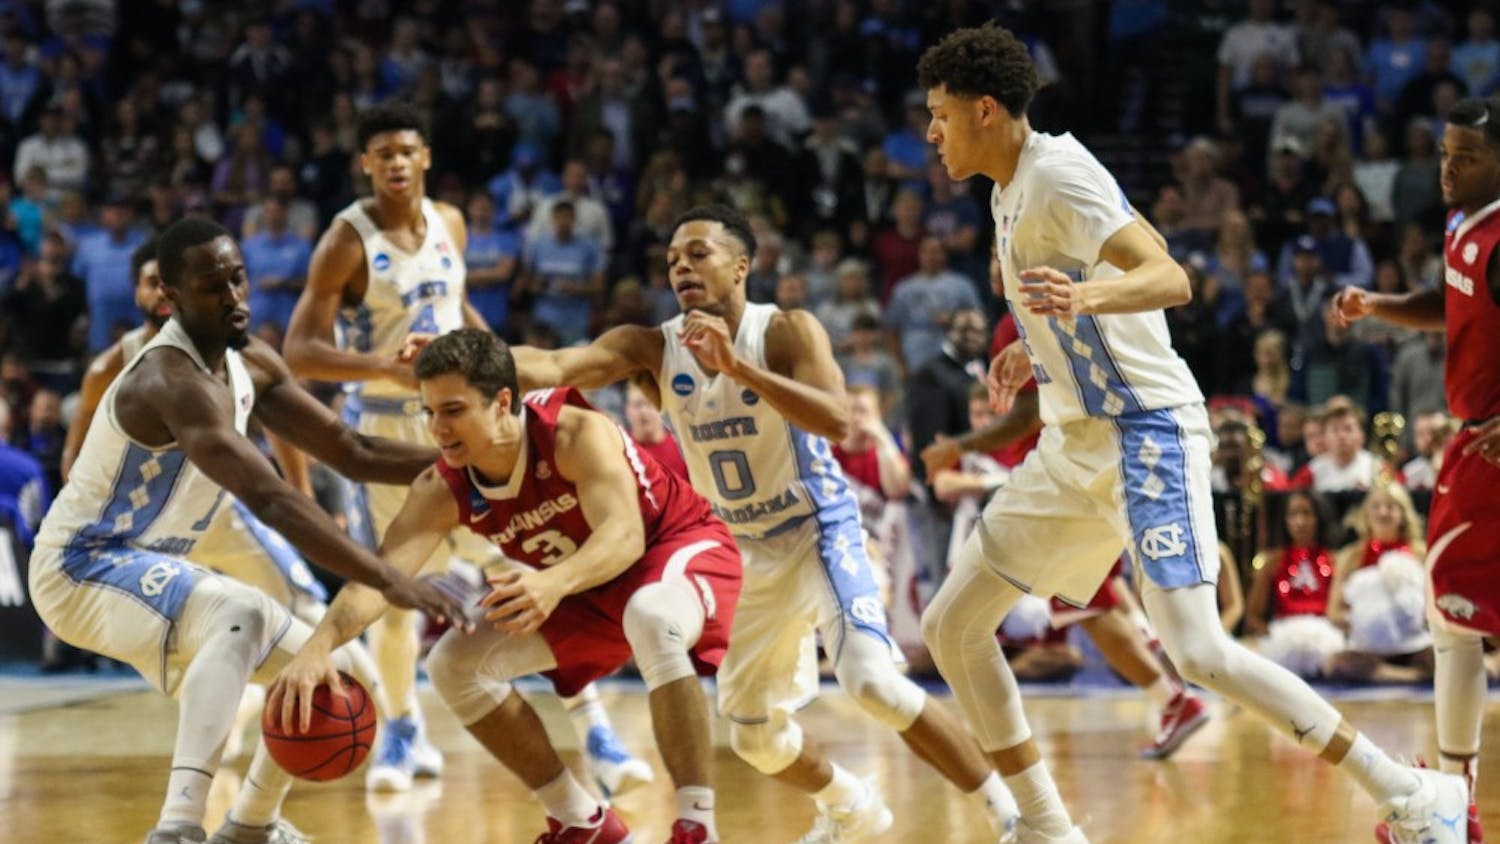 The North Carolina basketball team swarms Arkansas guard Dusty Hannahs (3) leading to a turnover in the second round of the NCAA Tournament in Greenville on Sunday.